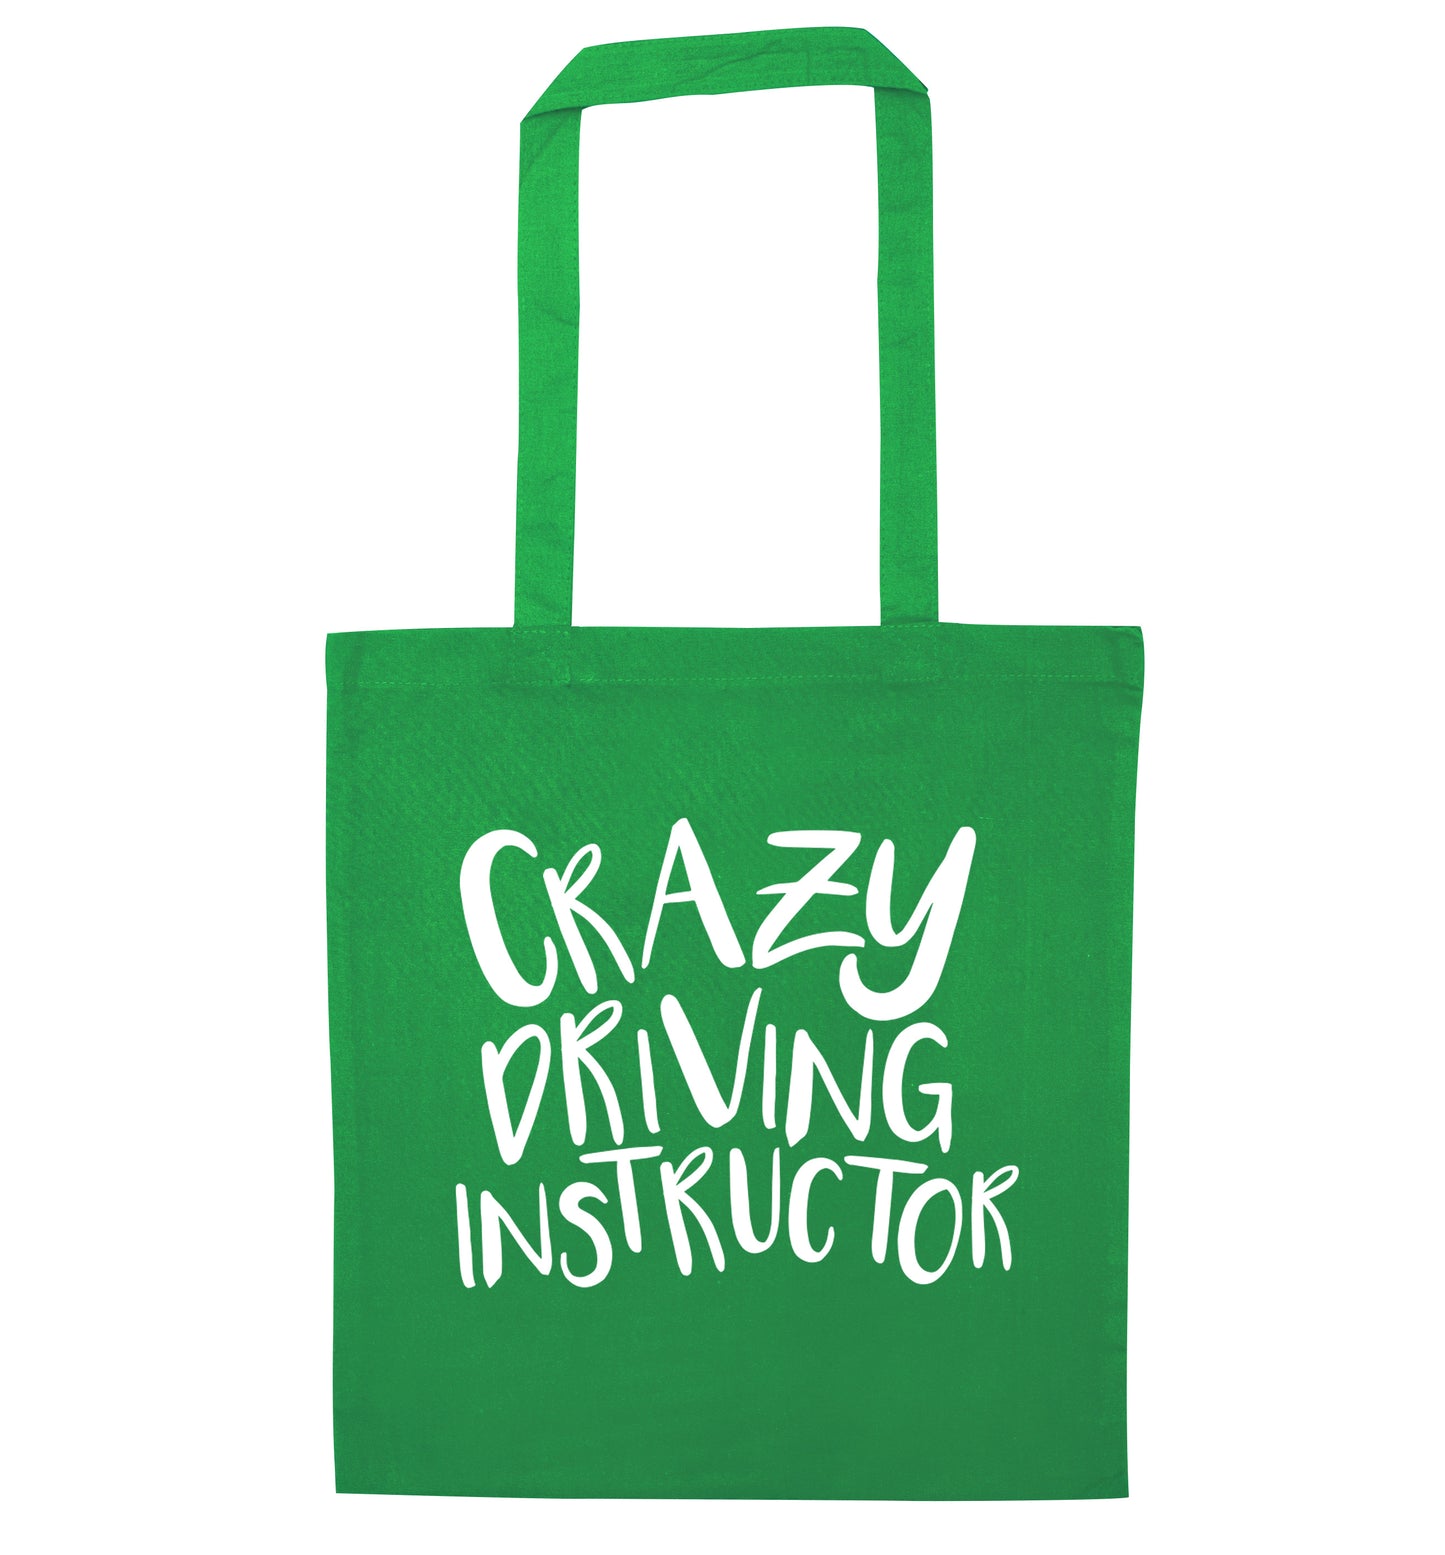 Crazy driving instructor green tote bag